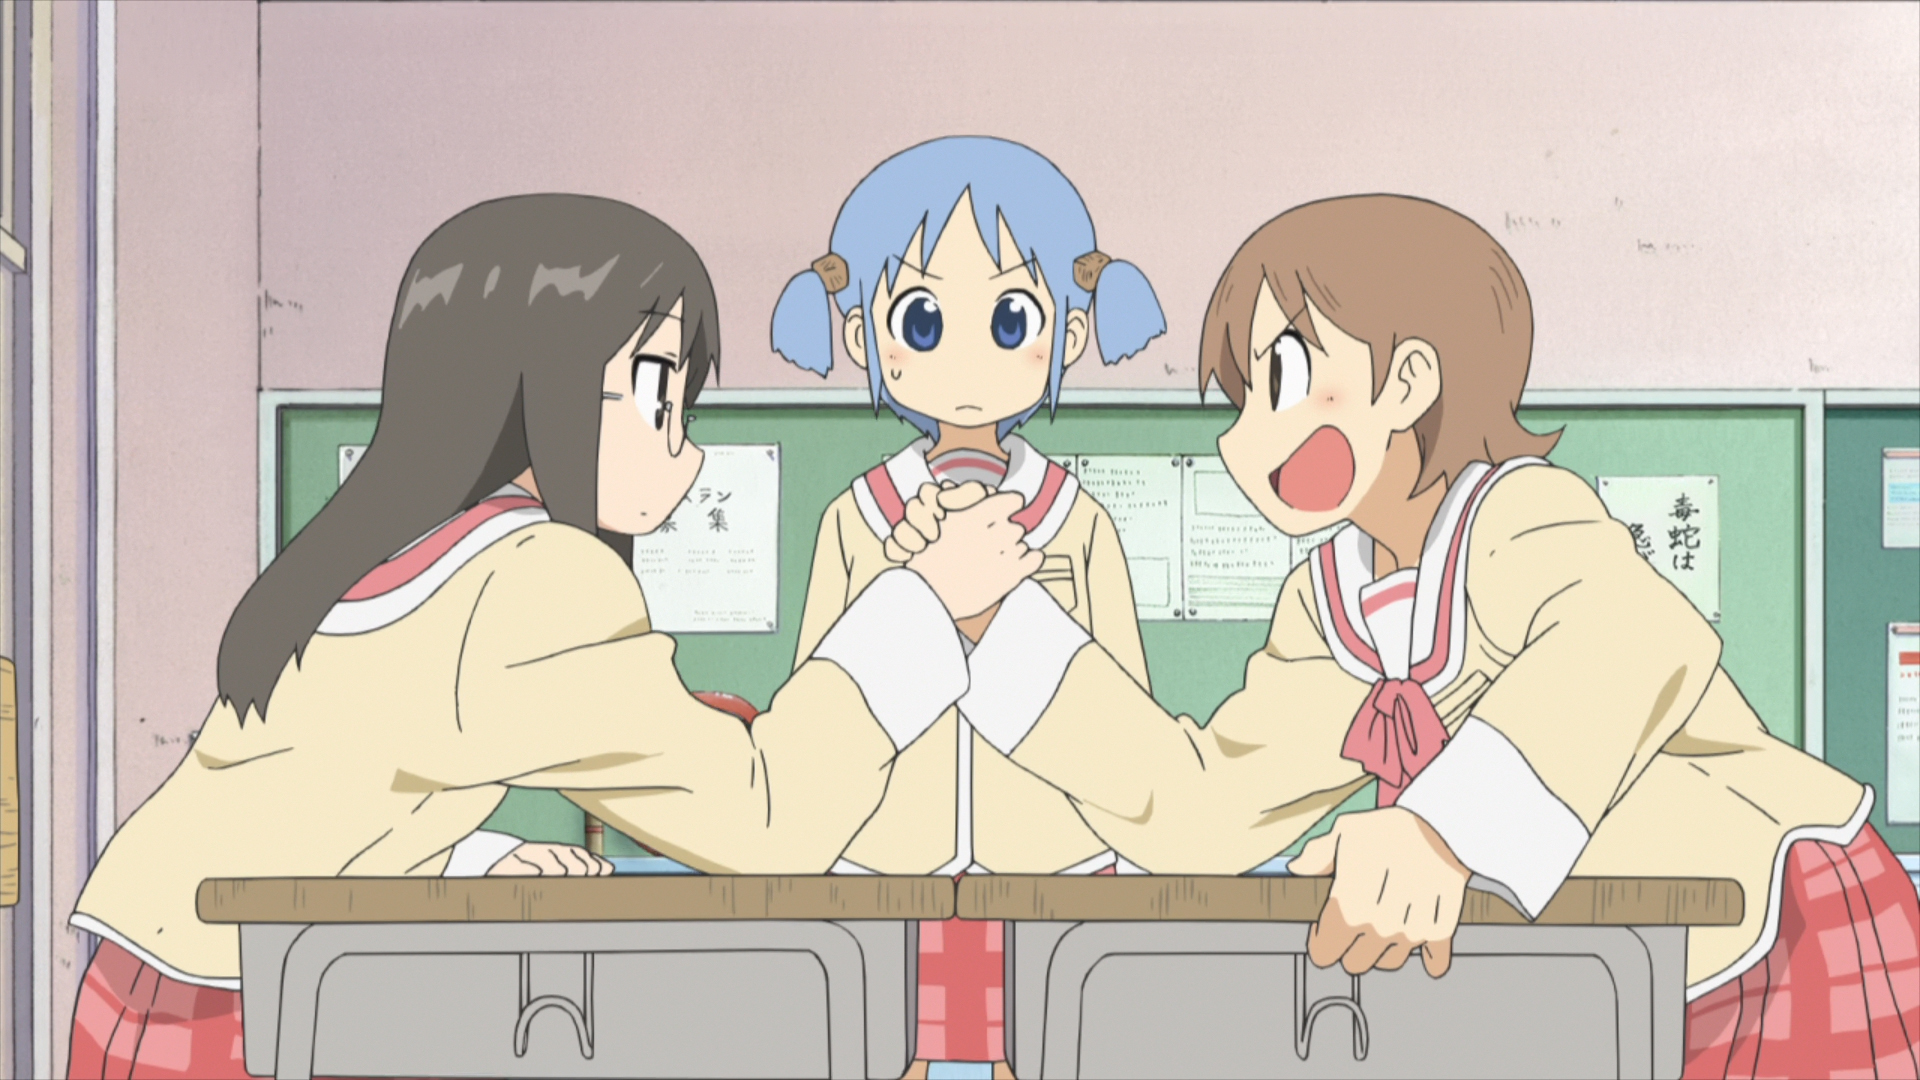 Nichijou Anime vs Manga Comparison - When it's just not your day - YouTube